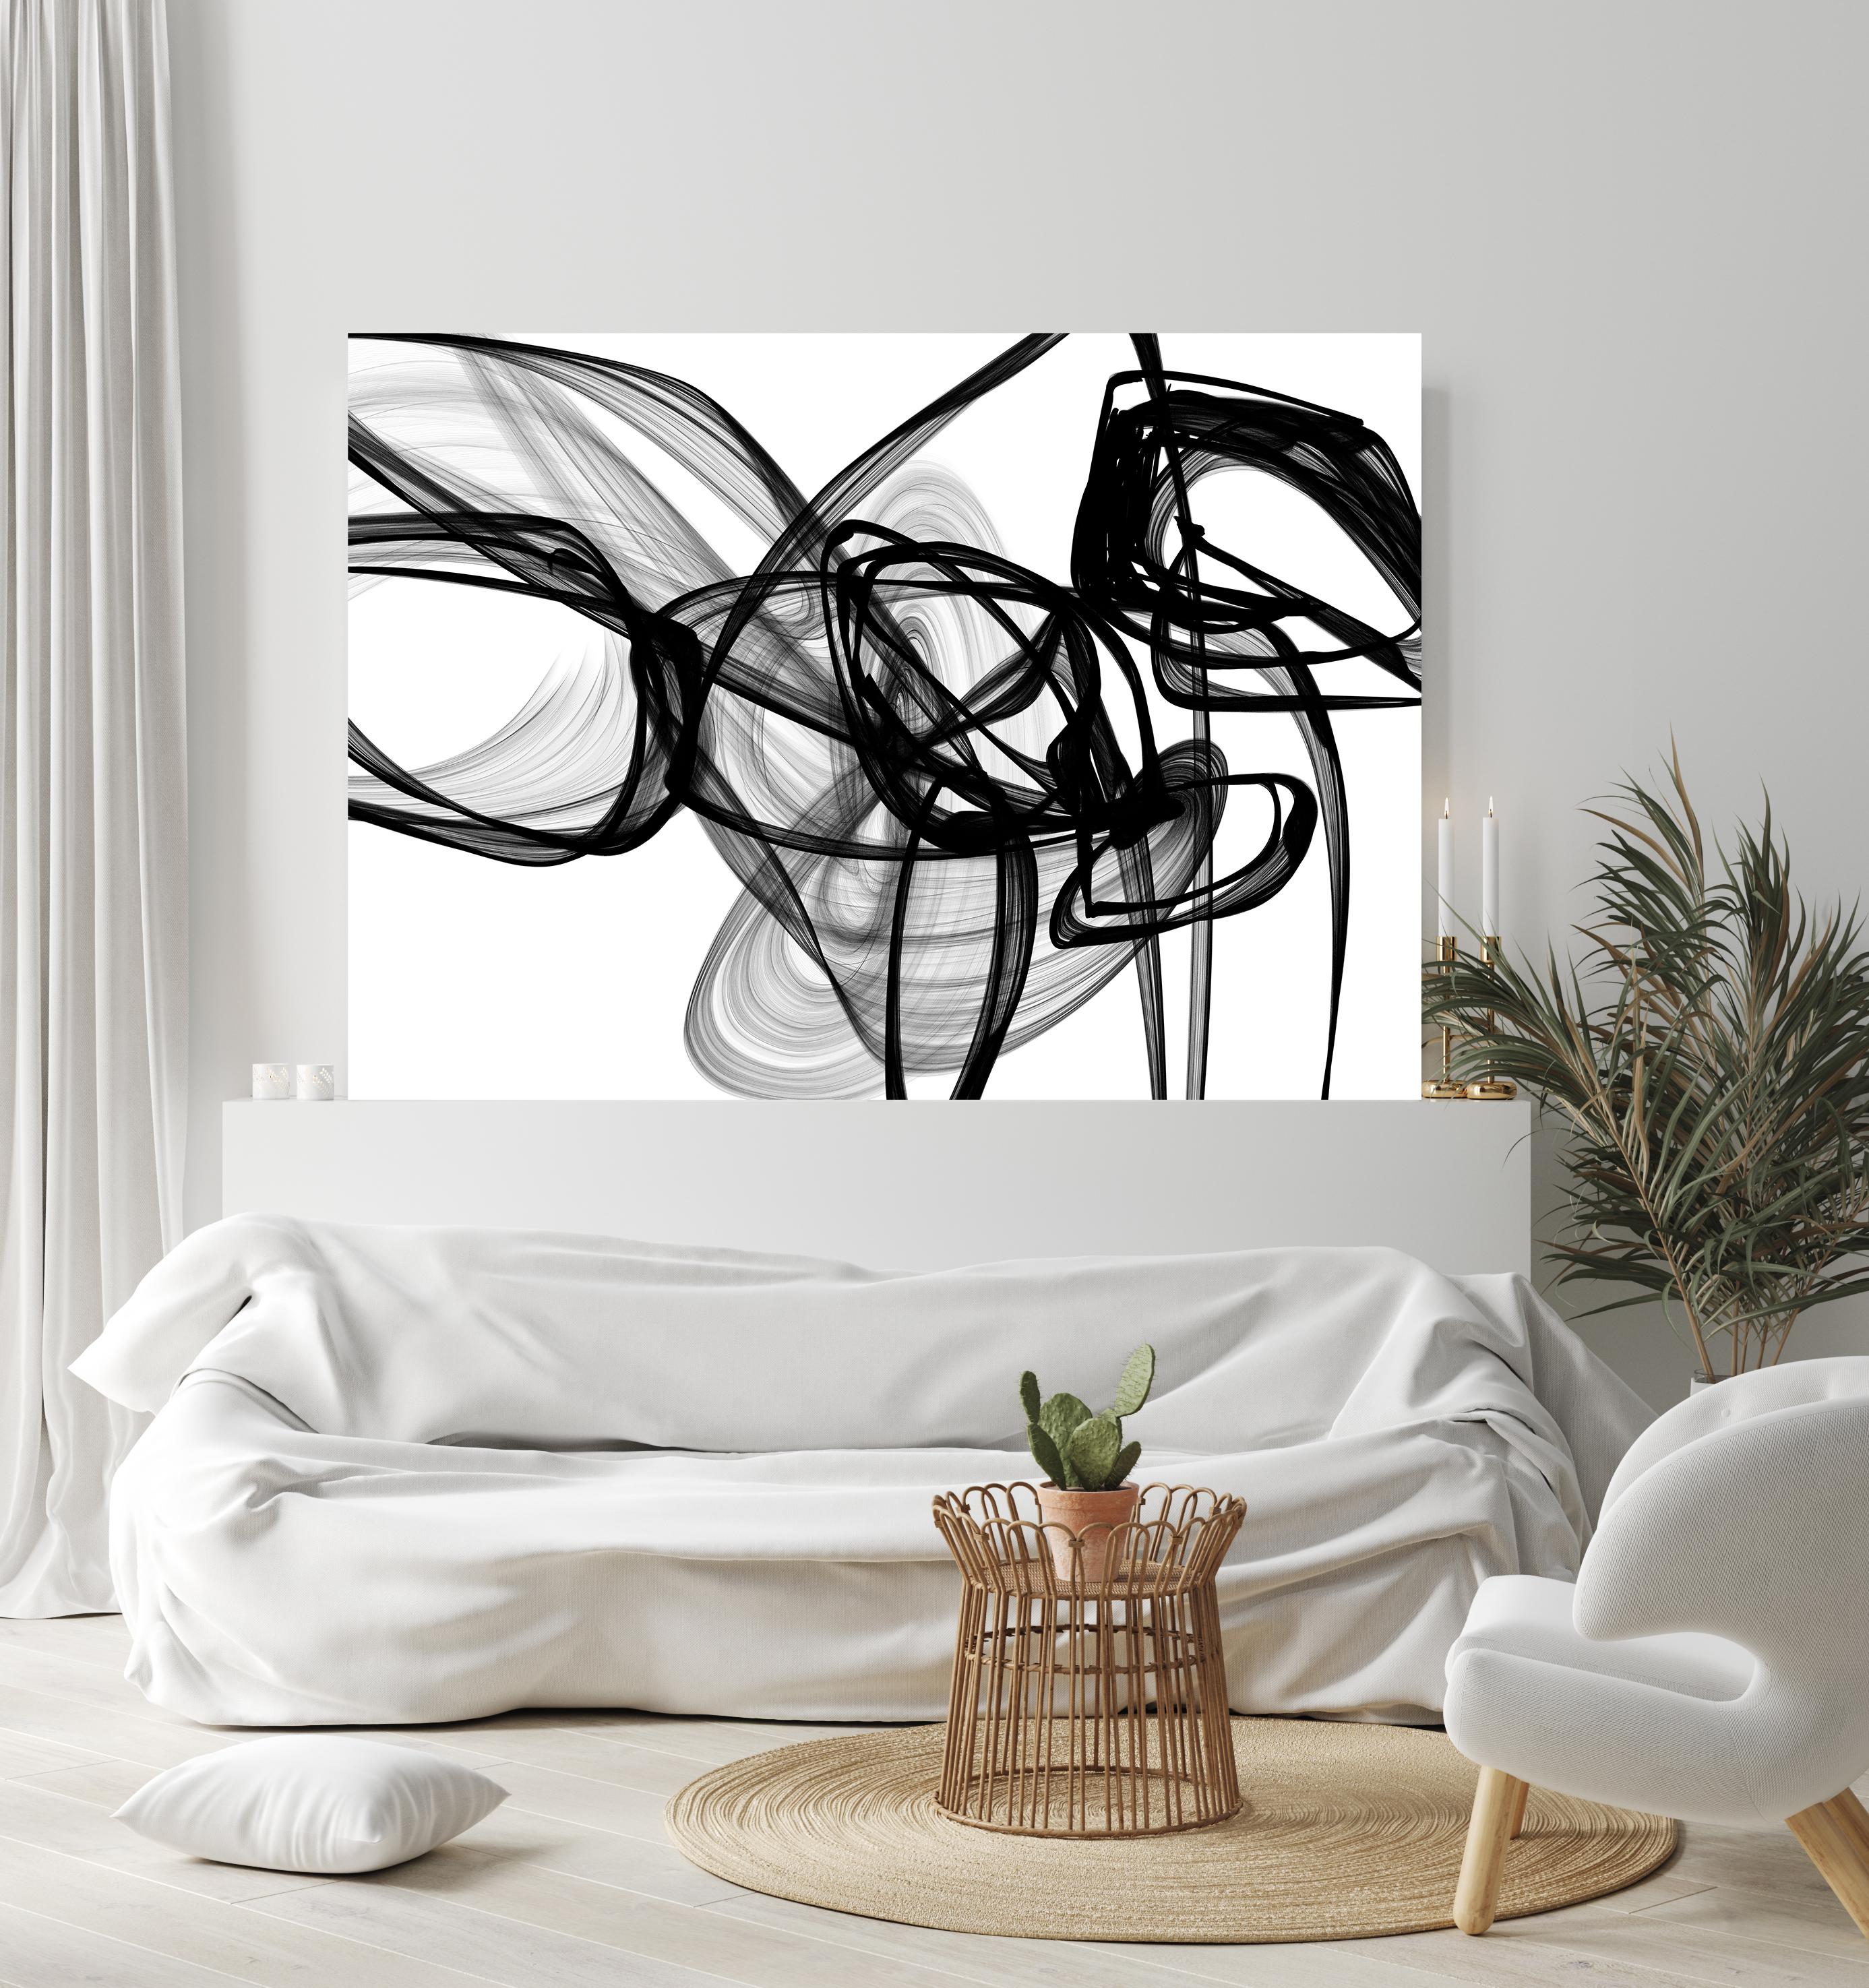 Abstract Black White New Media Painting on Canvas, Fight, Minimalist 68 x 46"